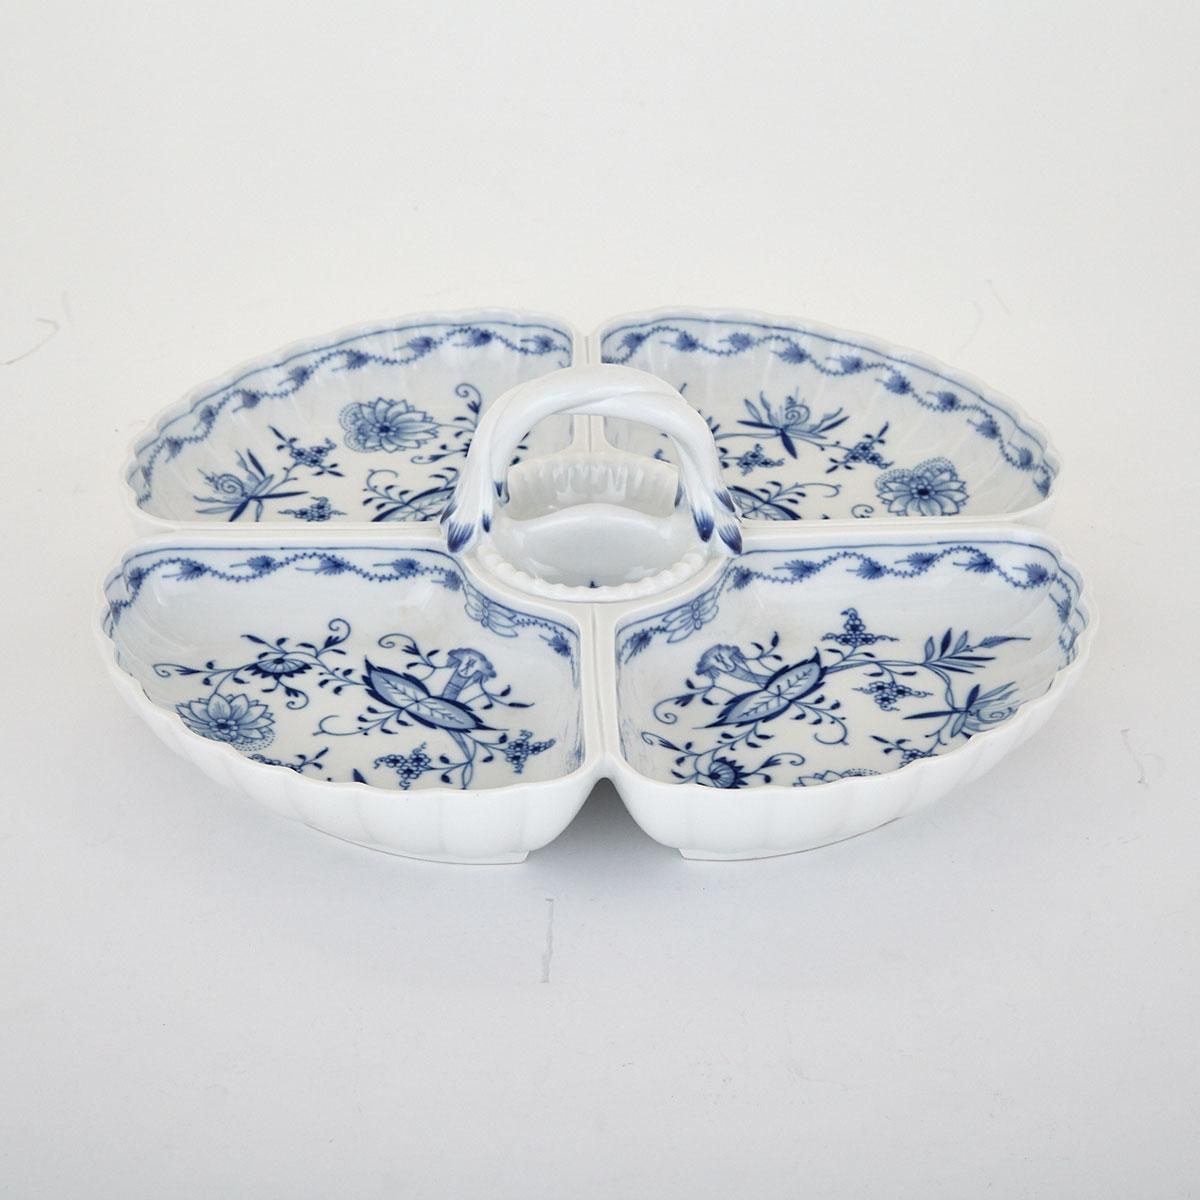 Meissen Blue Onion Pattern Hors d’Oeuvres Dish, late 19th century